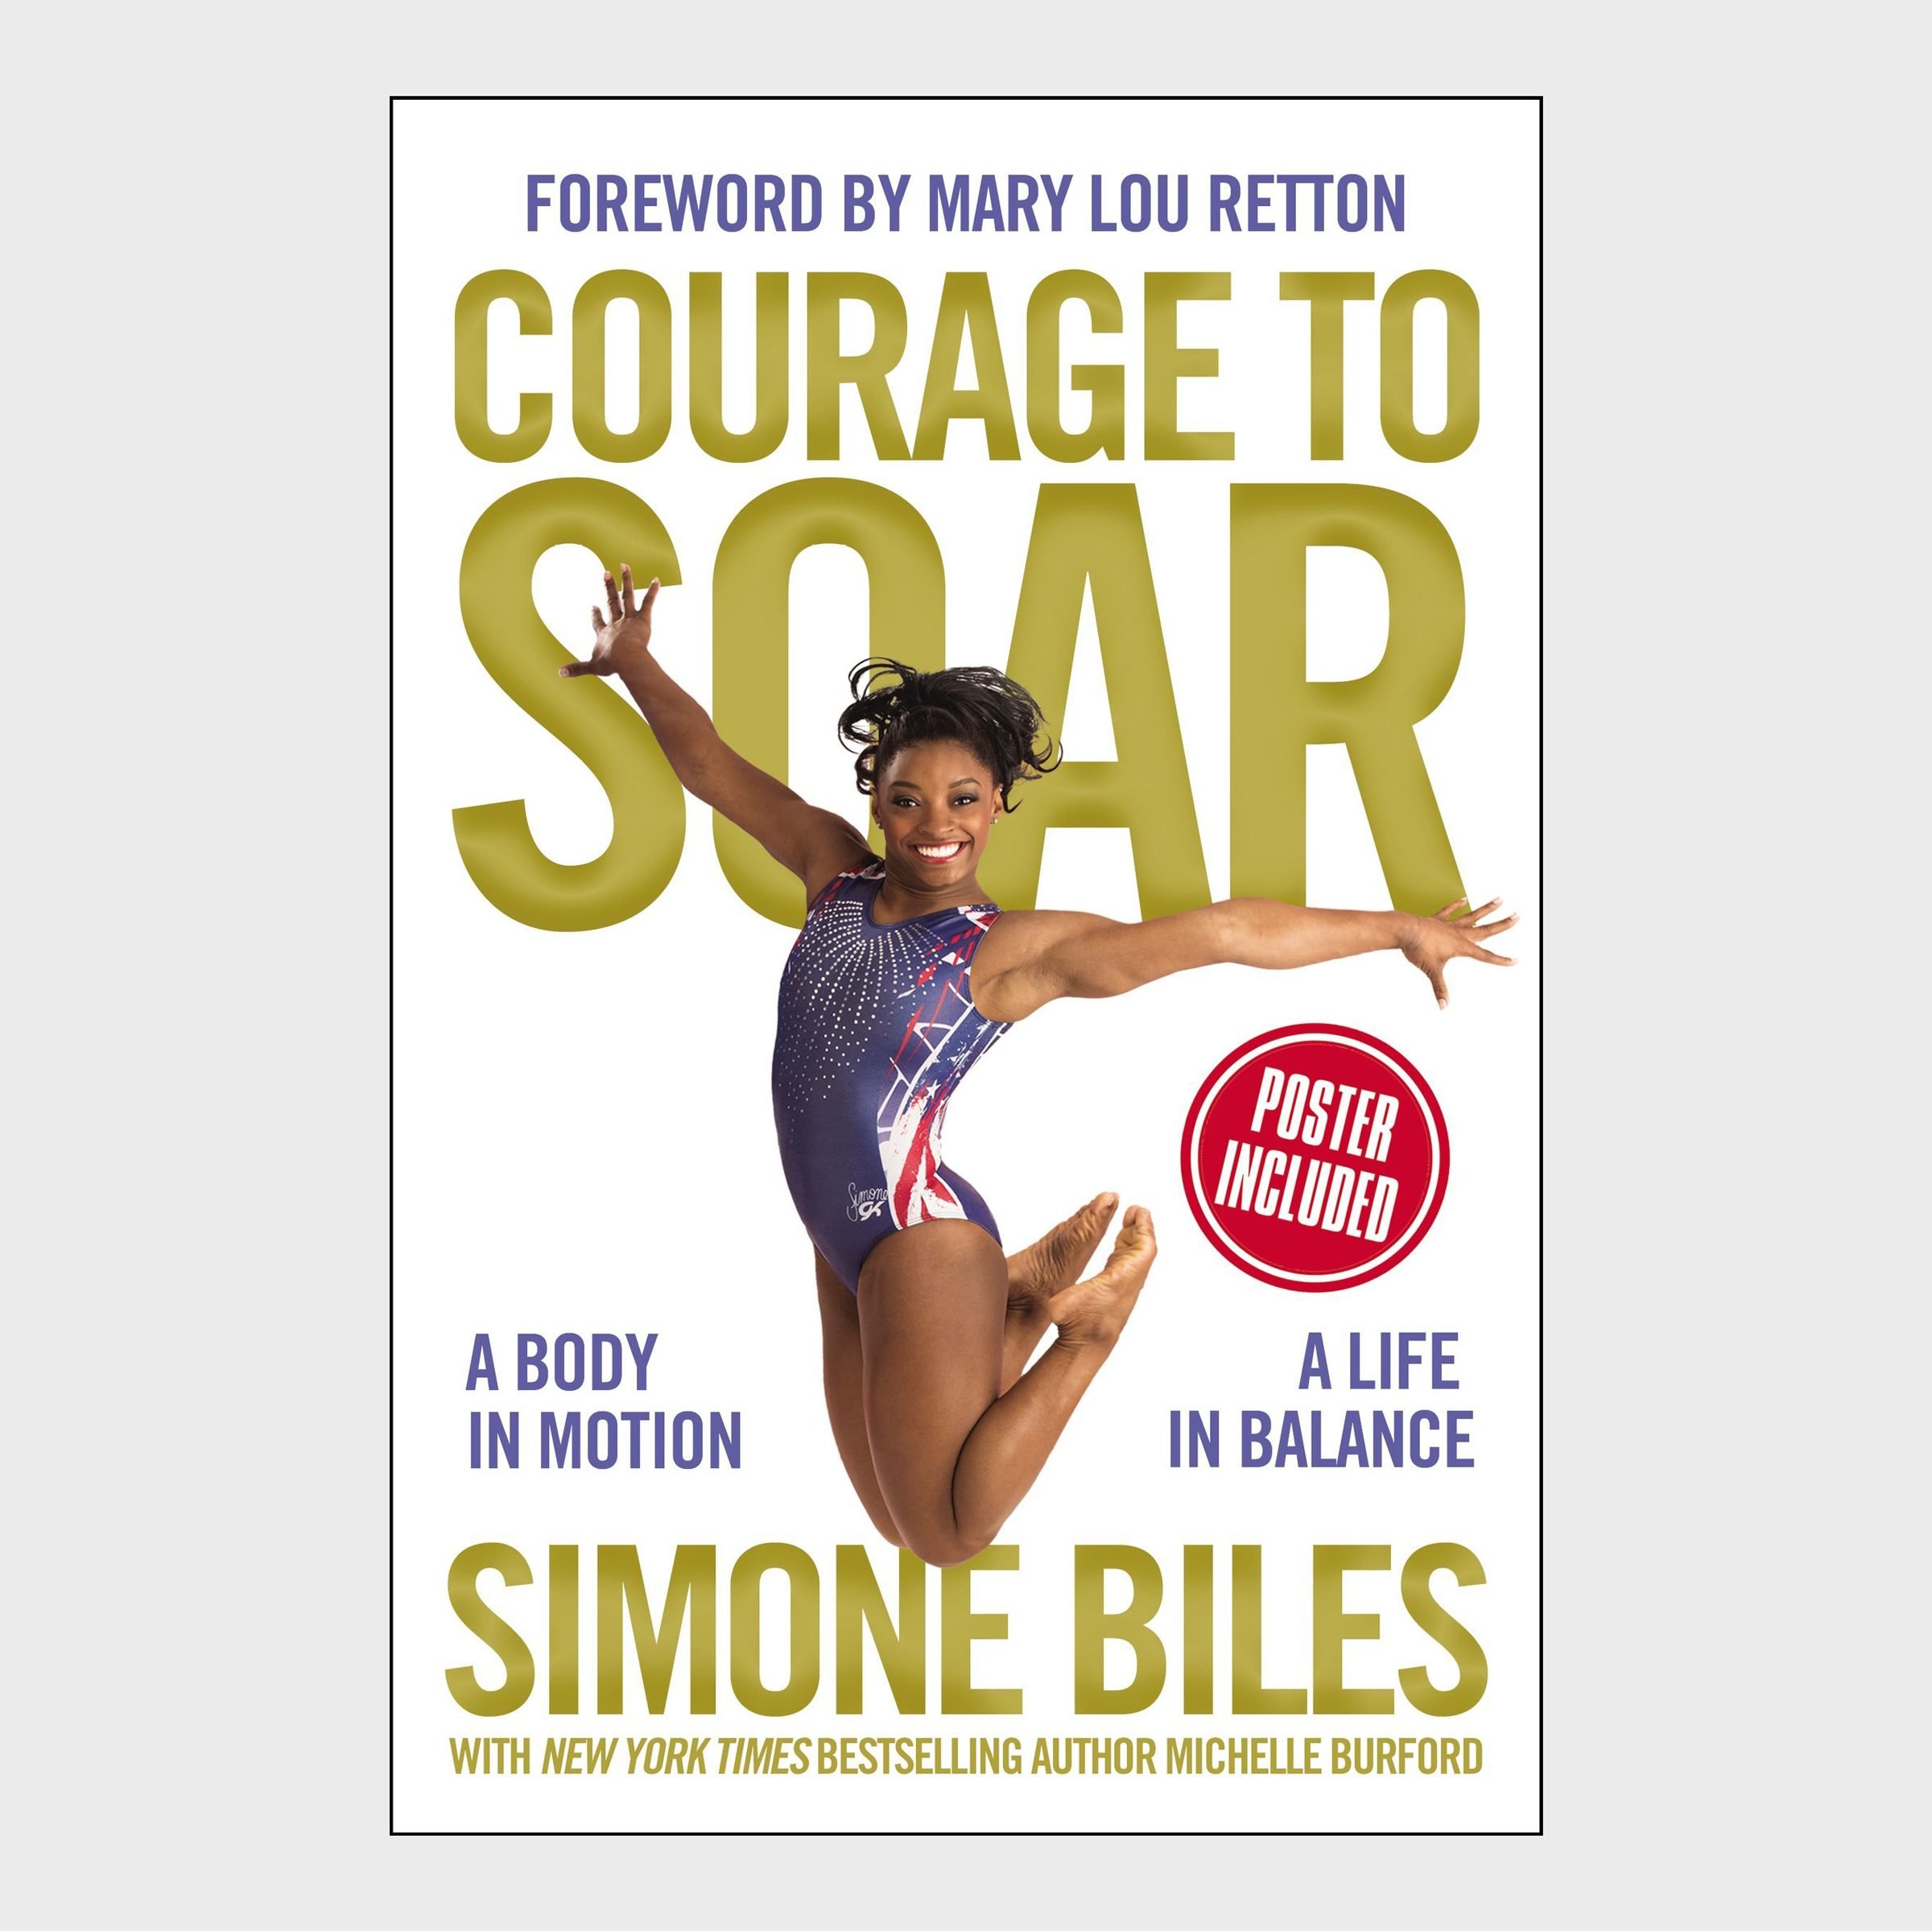 Courage to Soar: a Body in Motion, a Life in Balance by Simone Biles